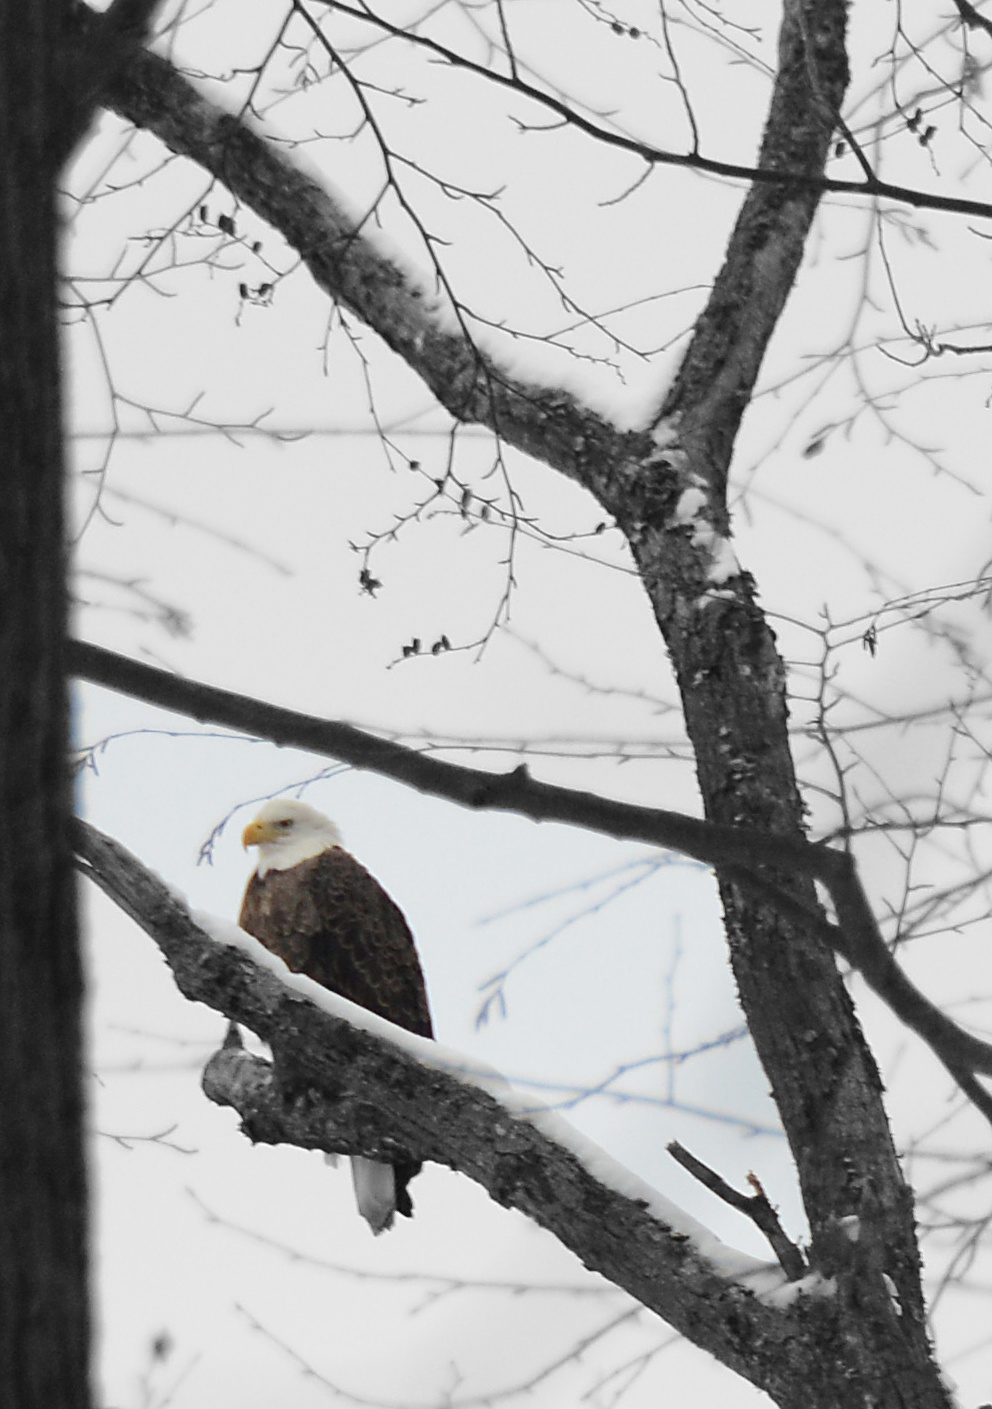 Fort Indiantown Gap becomes part of PA's bald eagle success story